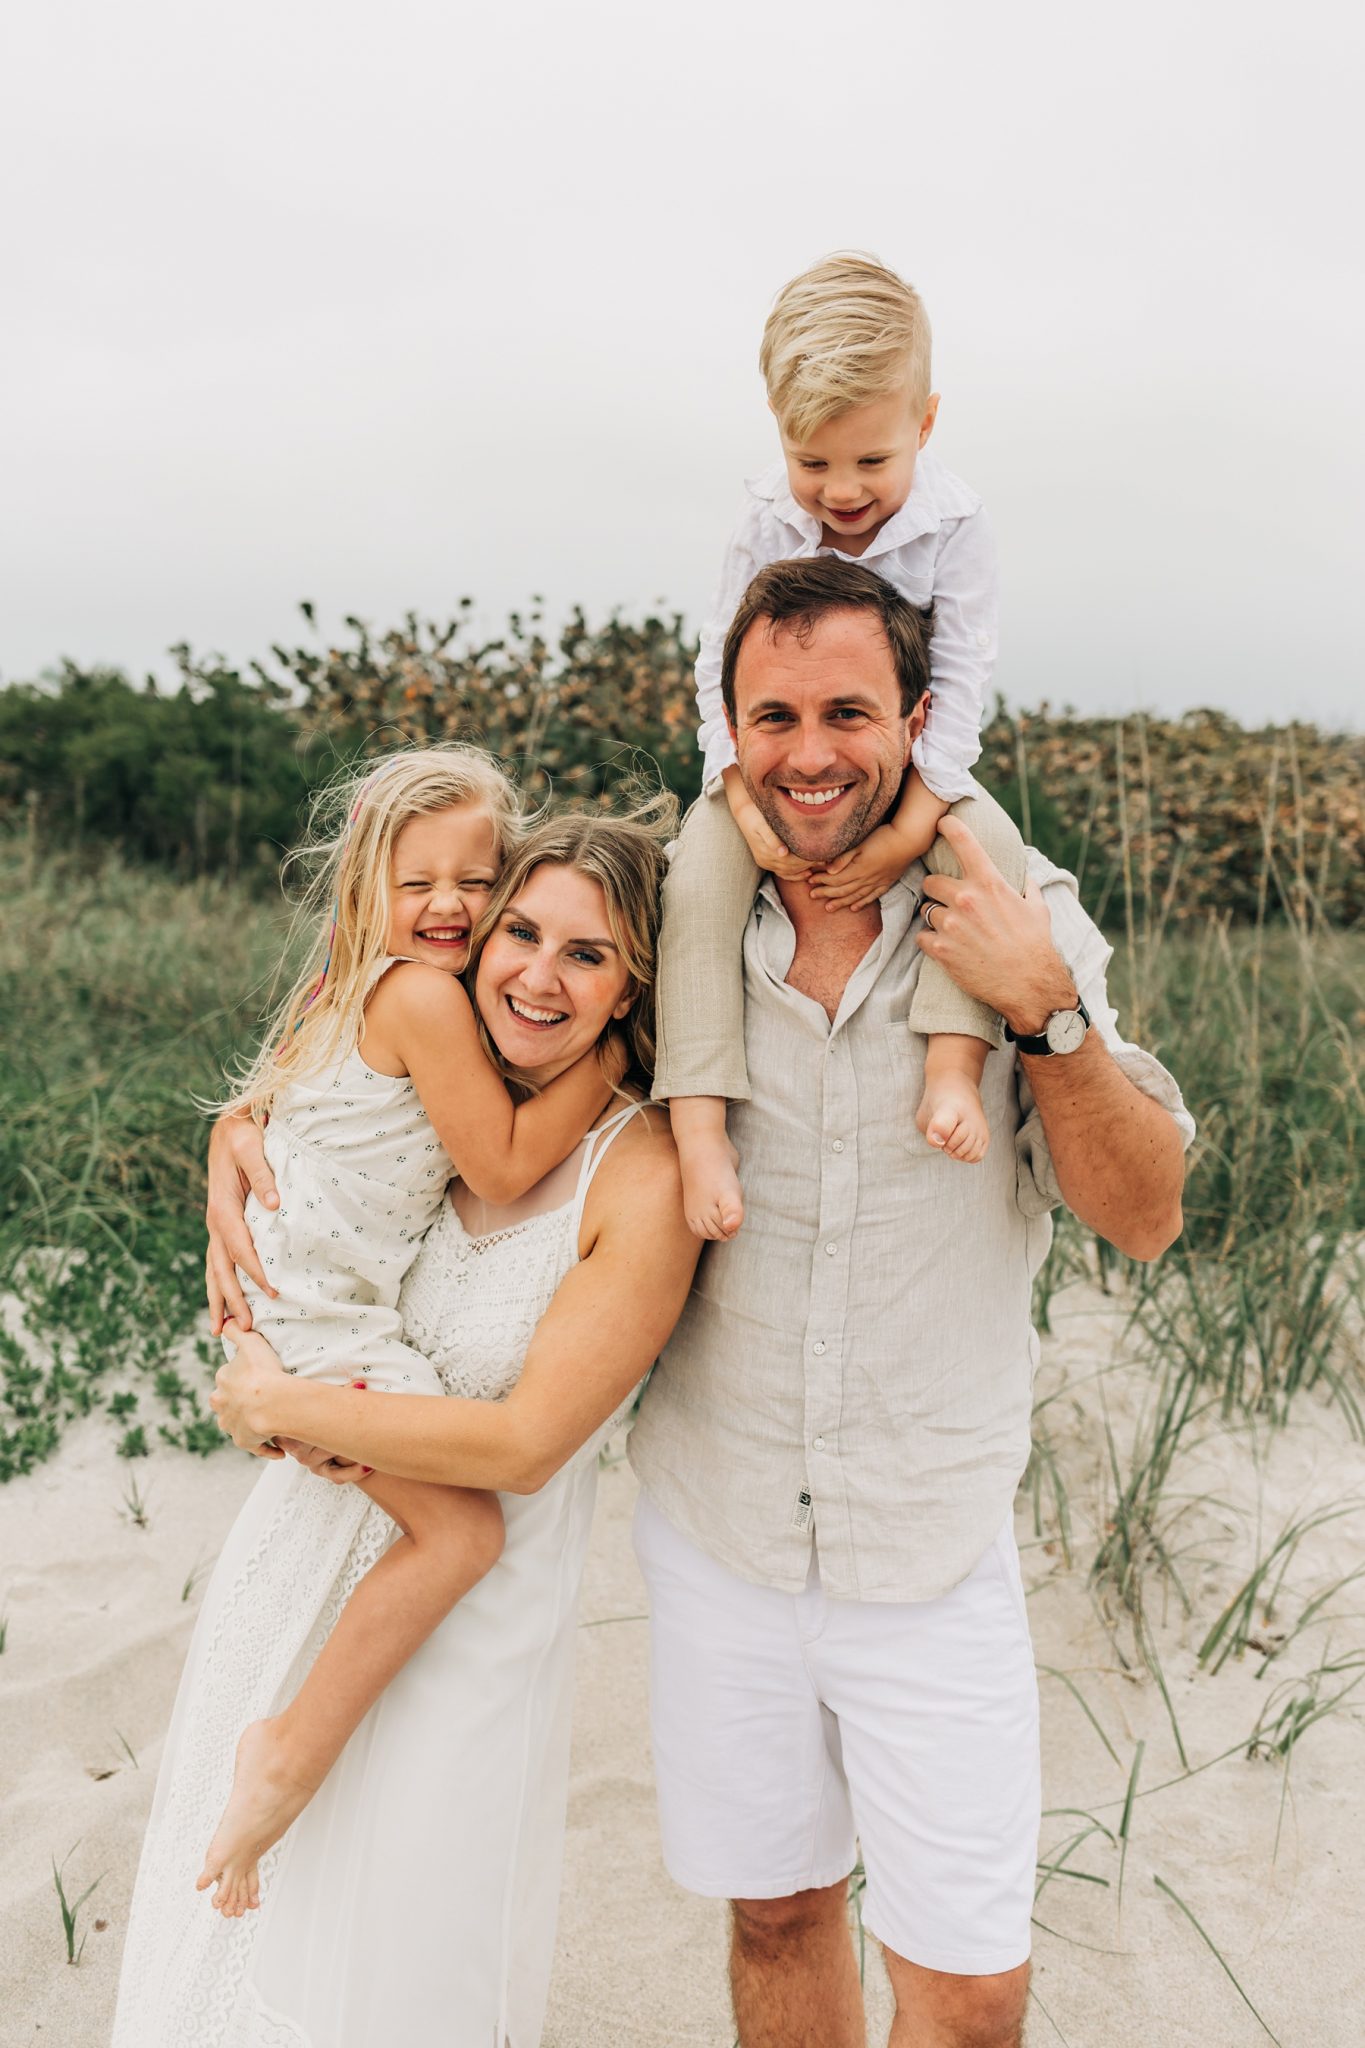 earthy neutrals 1 70+ Best Chosen Family Photo Outfit Ideas in Summer - 25